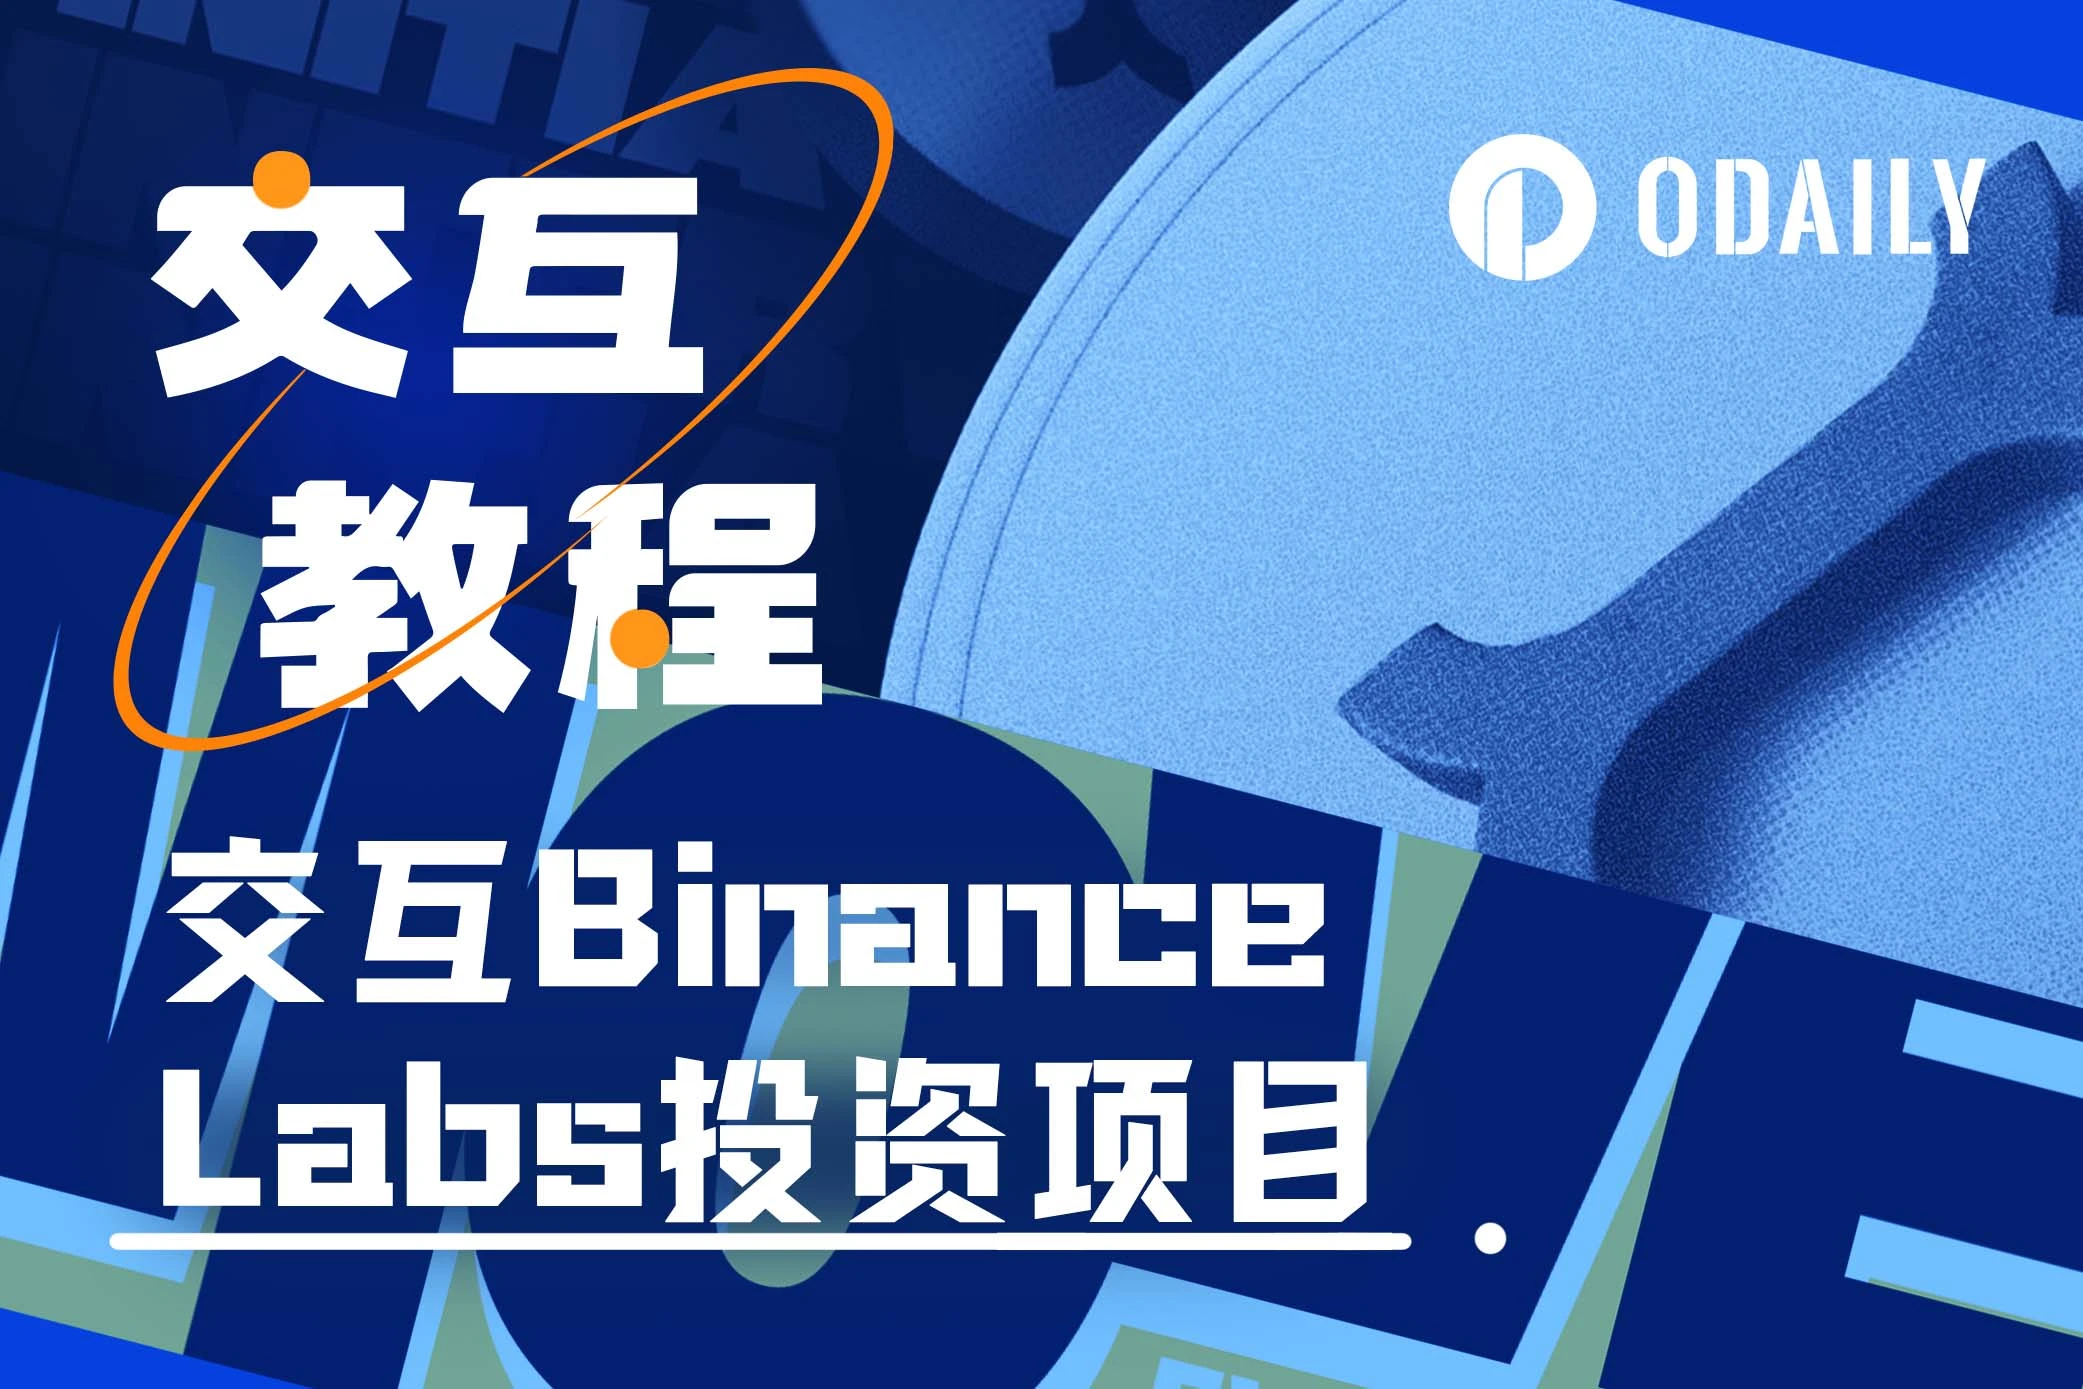 Binance Labs invested in early-stage potential projects that you must participate in this week: Movement and Initia